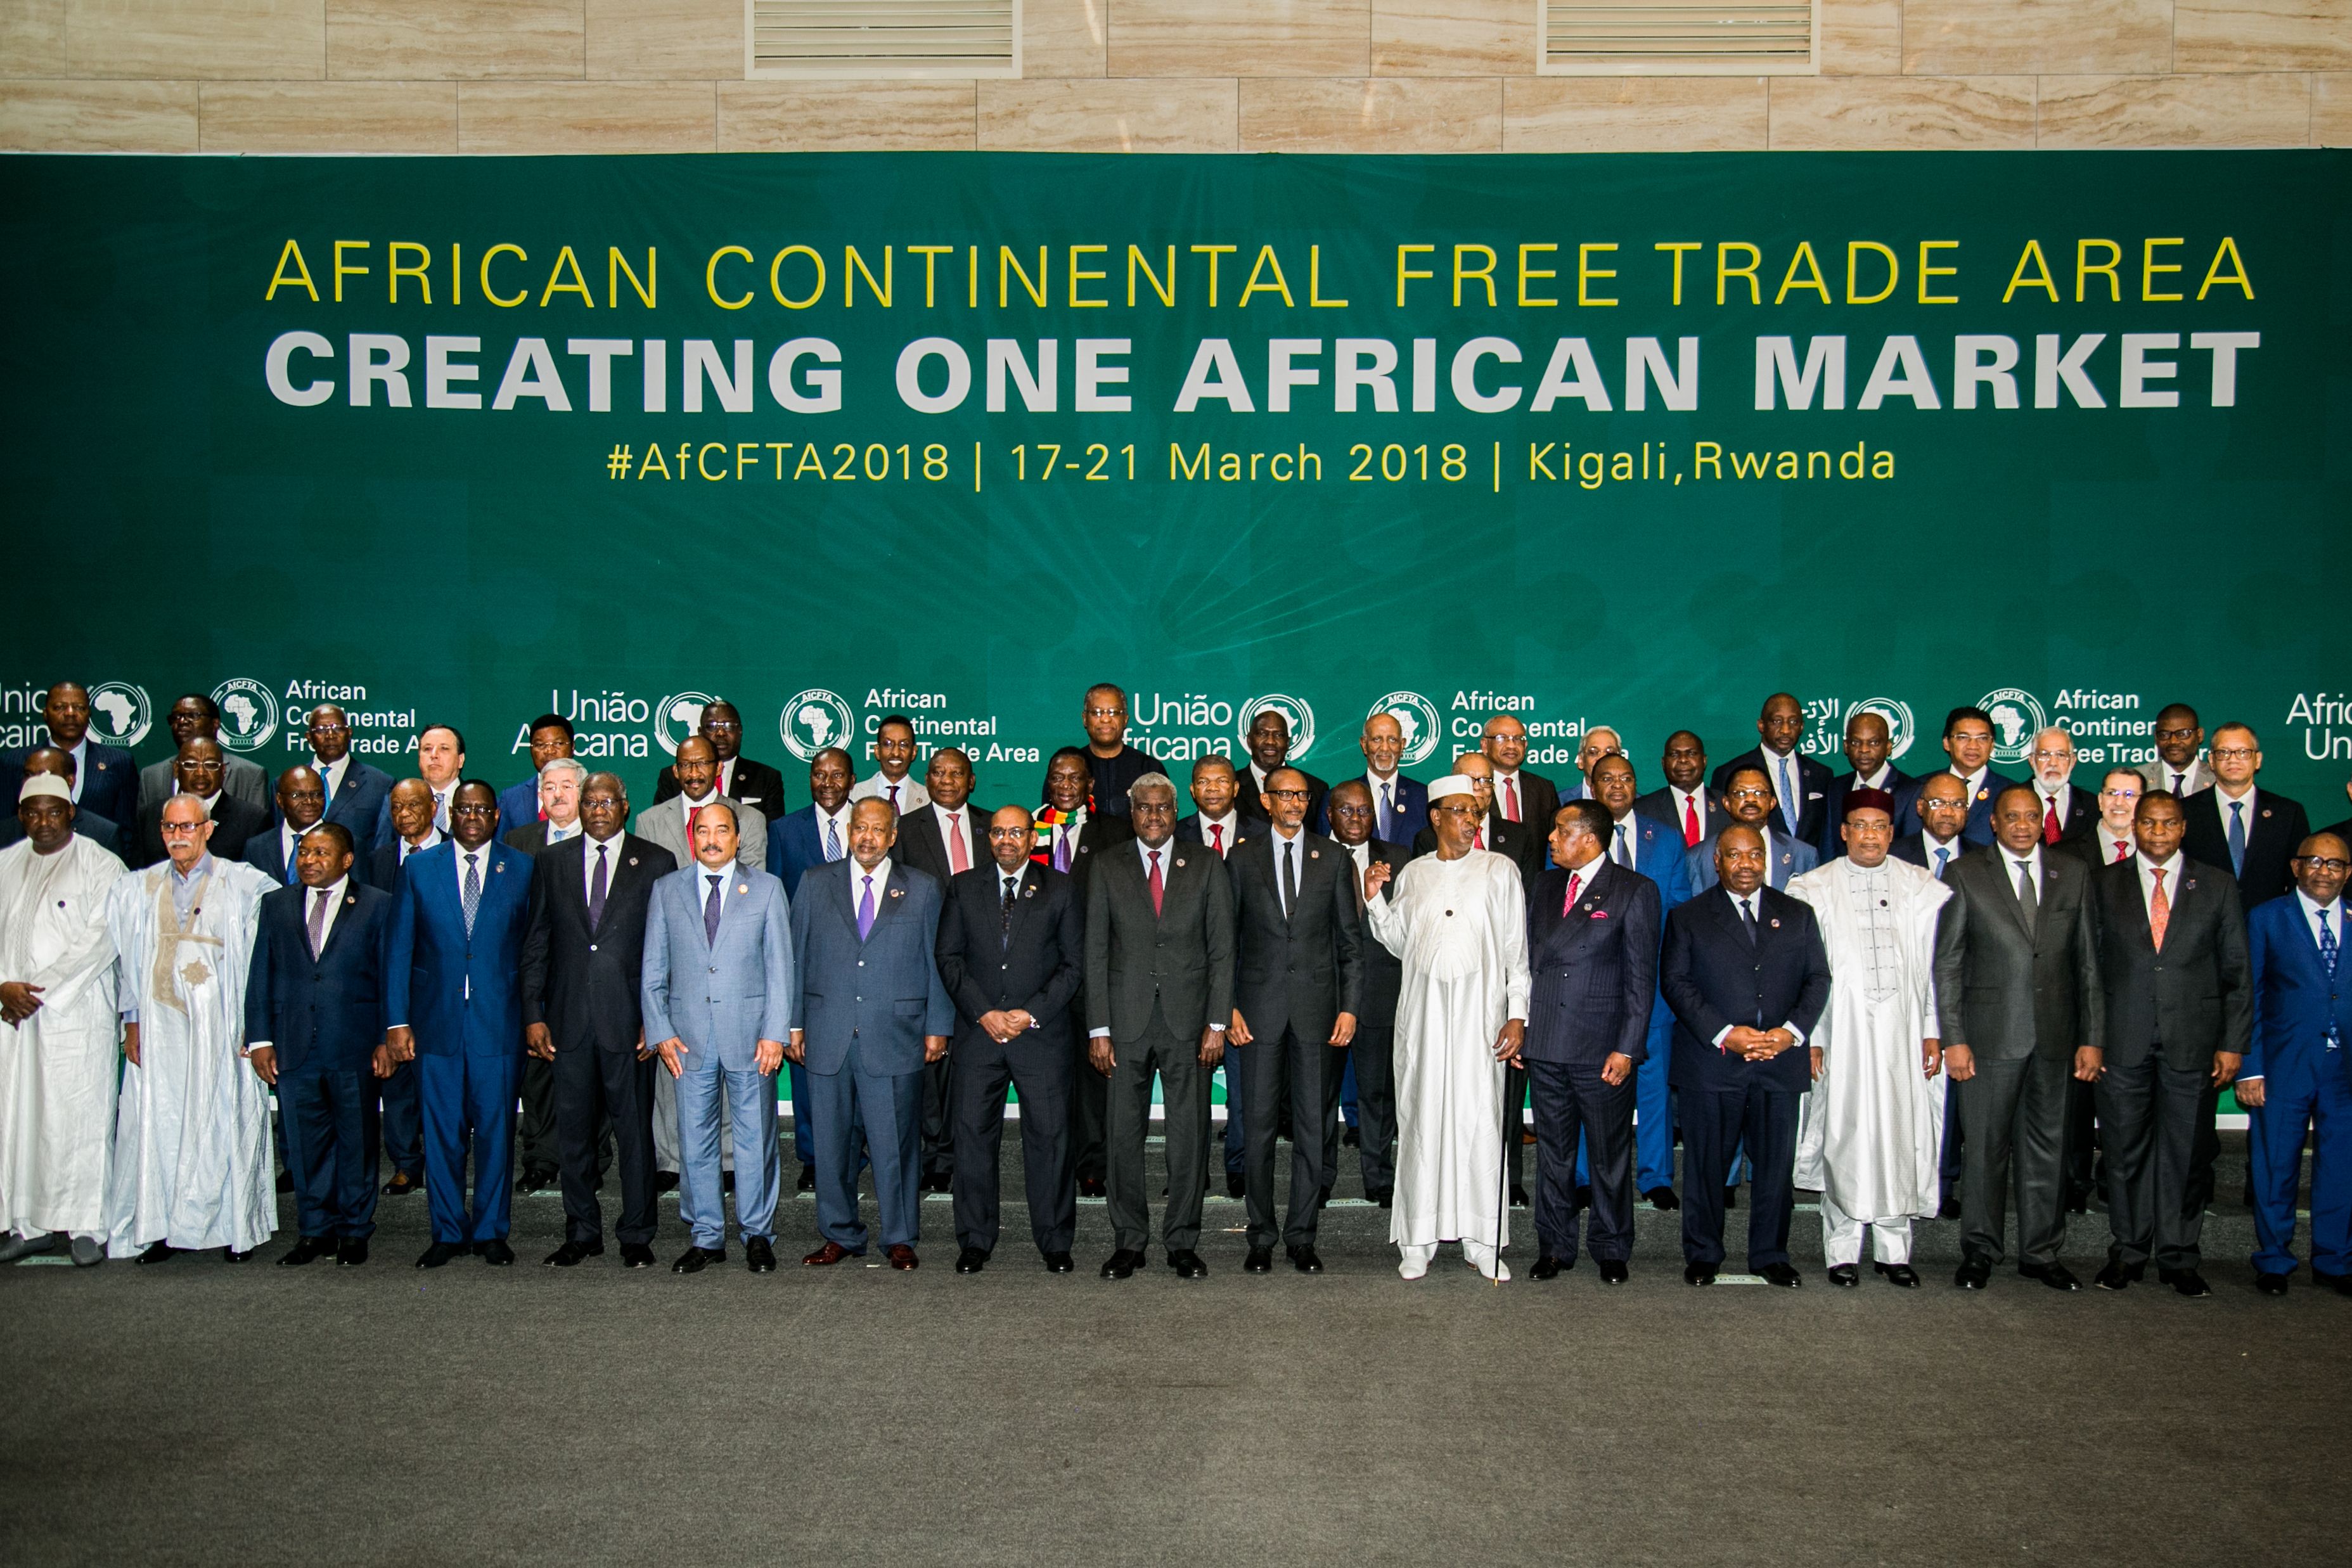 The African Heads of States and Governments pose during African Union (AU) Summit for the agreement to establish the African Continental Free Trade Area in Kigali, Rwanda, on March 21, 2018. / AFP PHOTO / STR        (Photo credit should read STR/AFP/Getty Images)